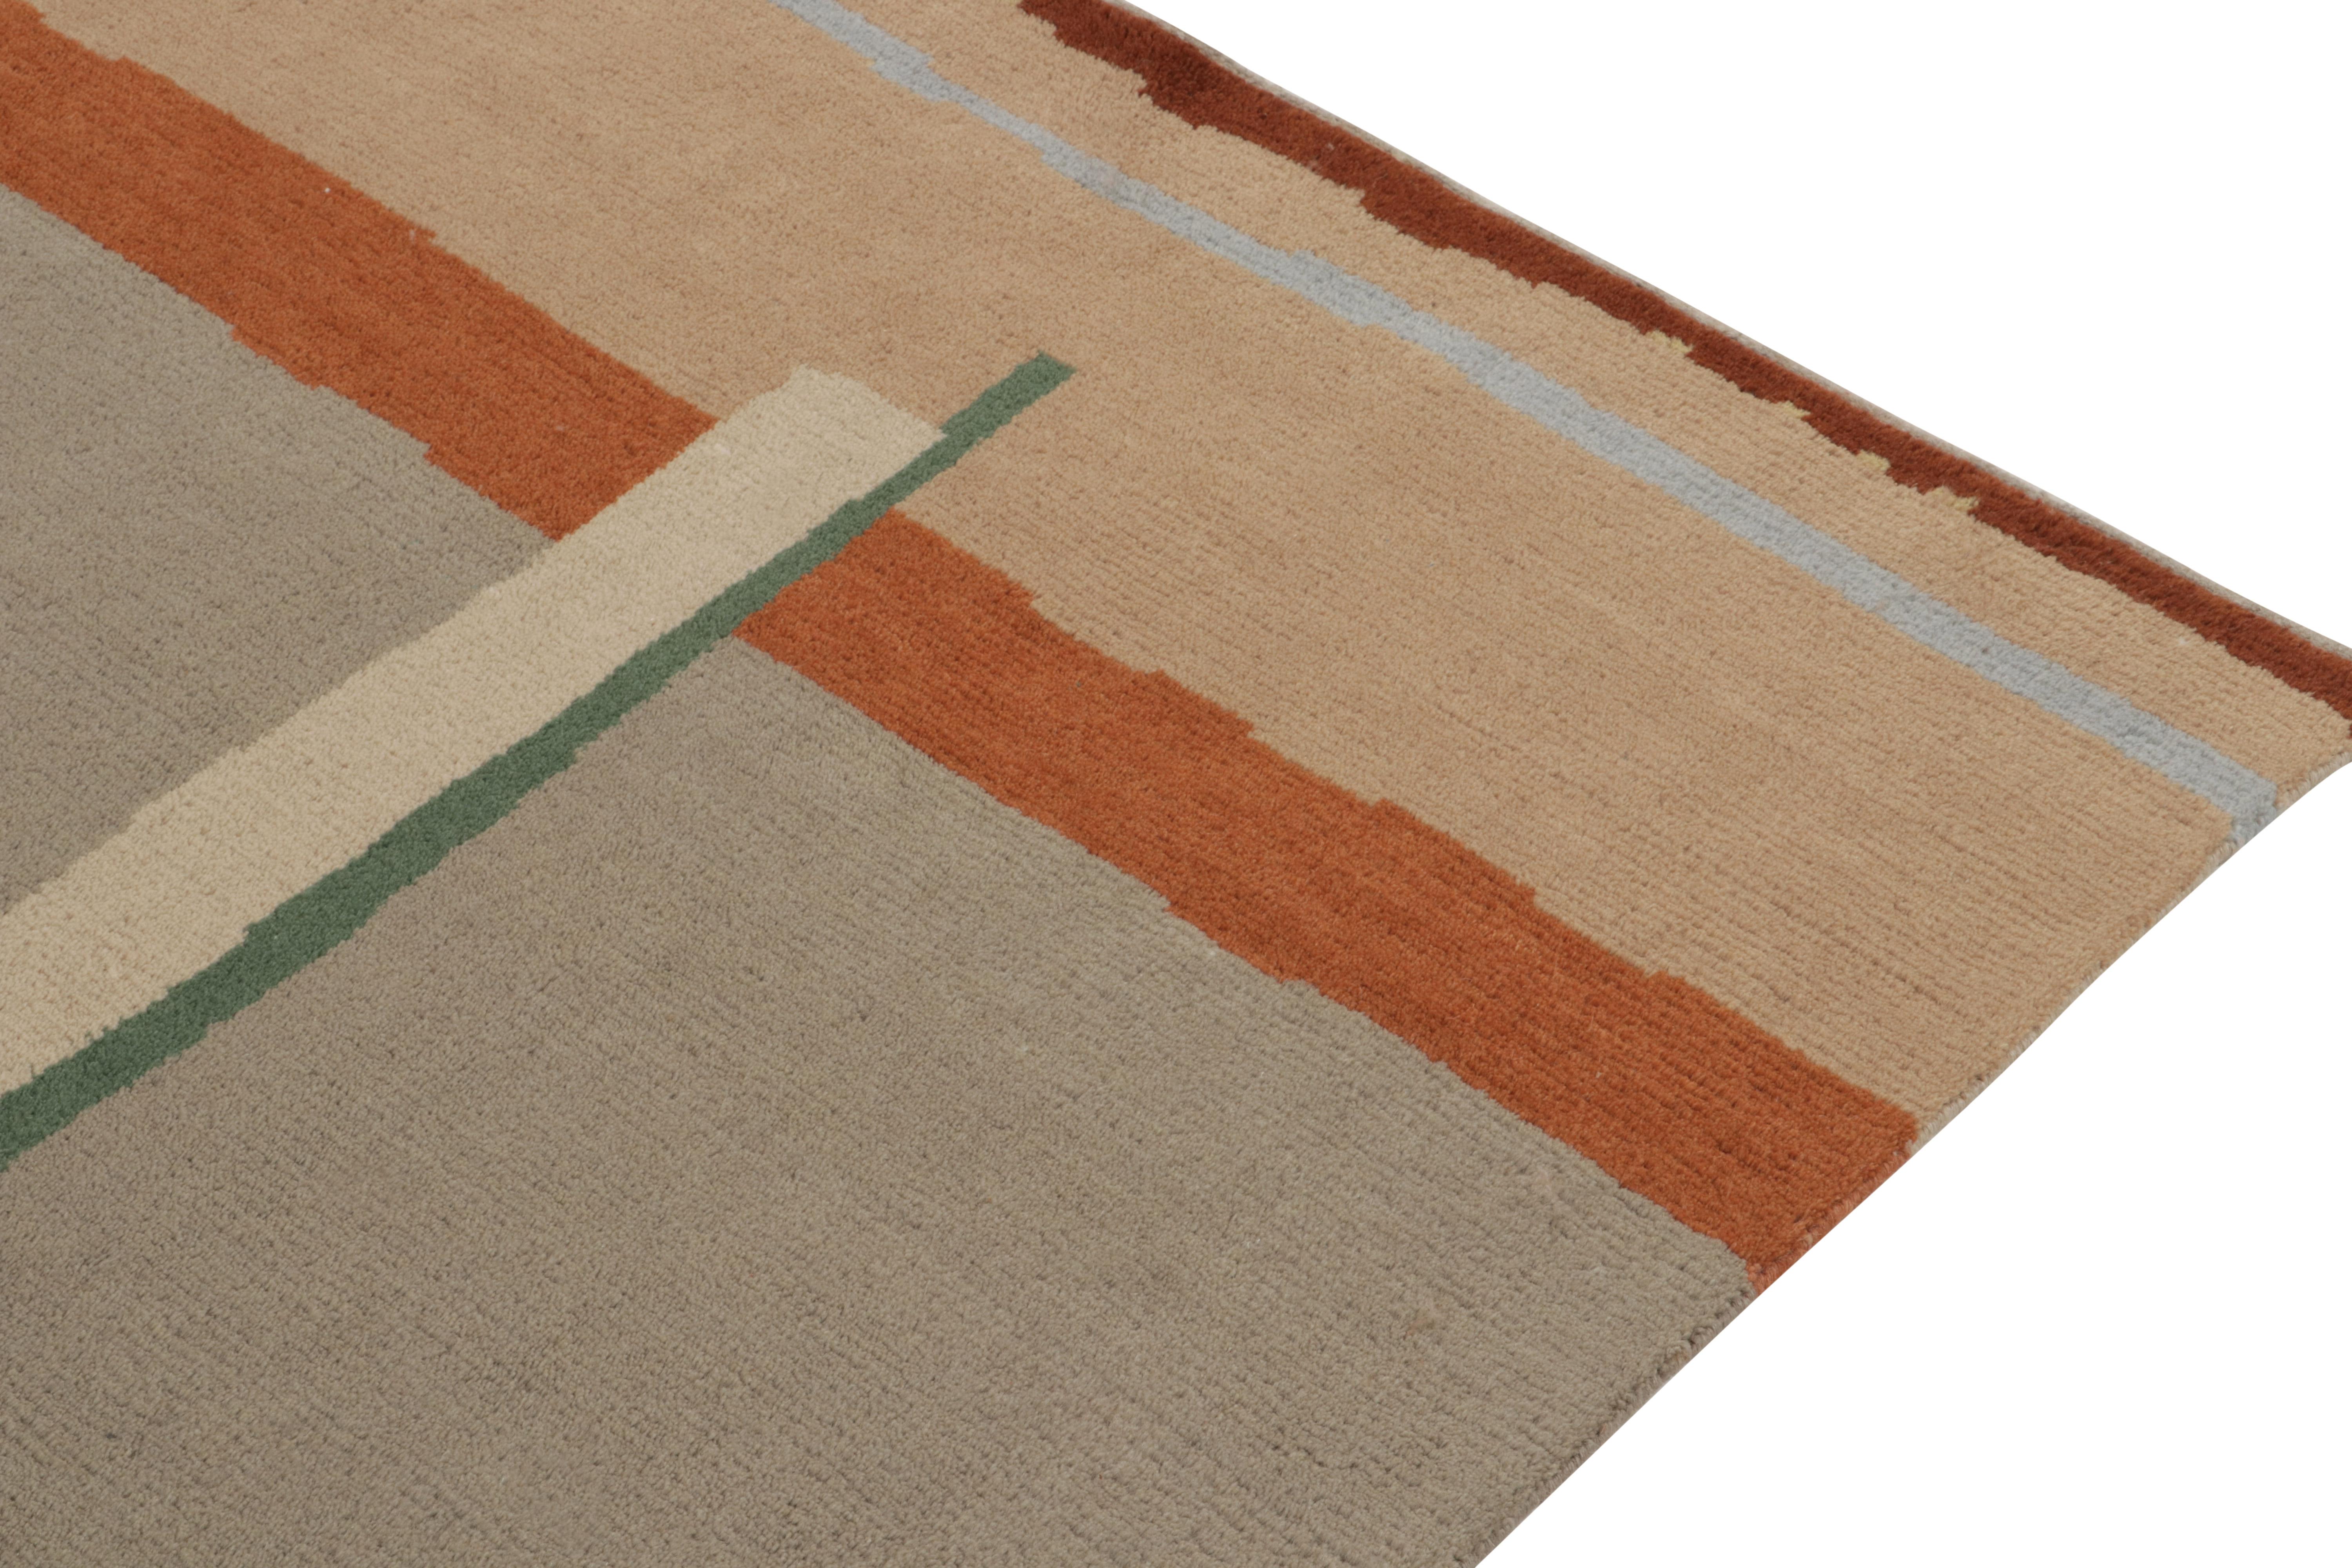 Rug & Kilim’s Art Deco Style Rug in Gray, Orange & Beige Geometric Patterns In New Condition For Sale In Long Island City, NY